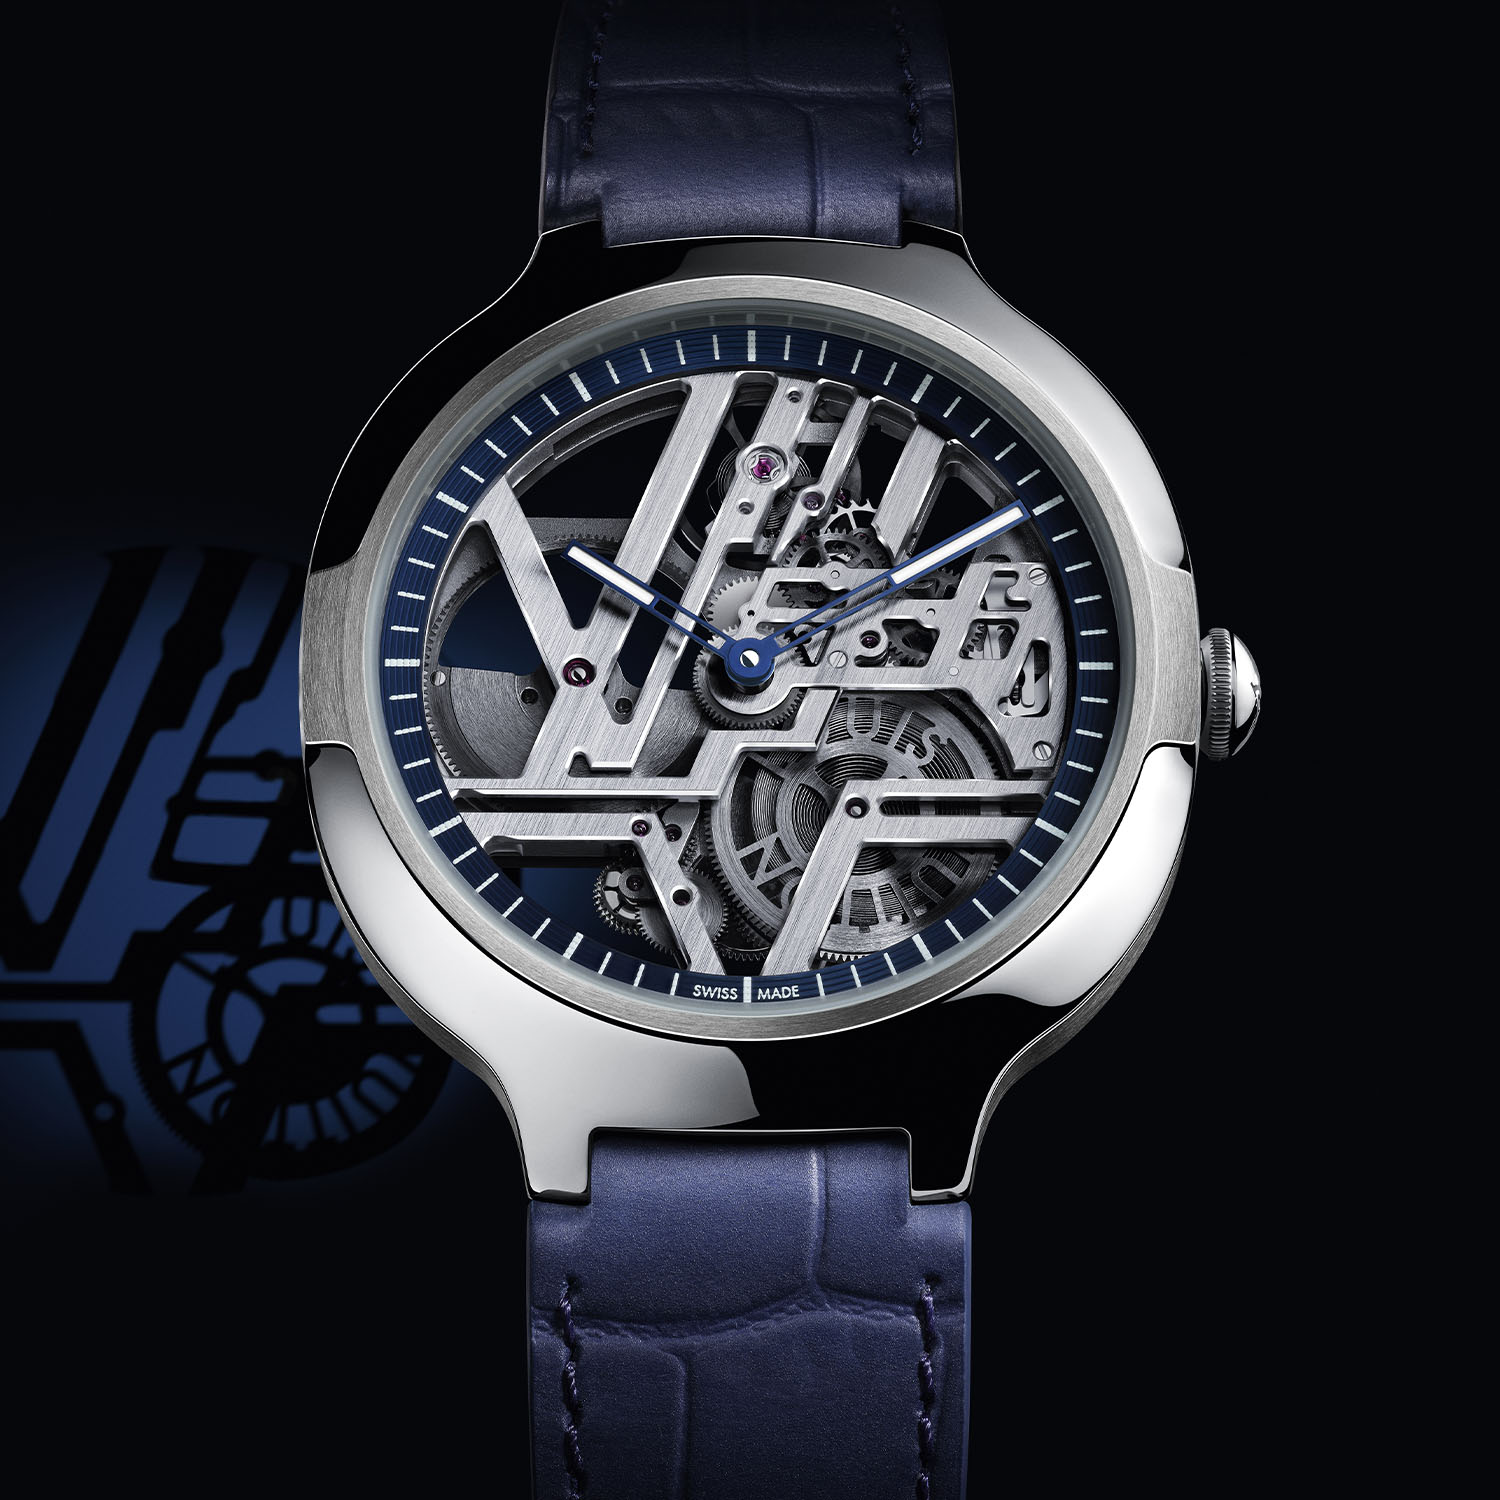 Louis Vuitton launches new high horology masterpieces